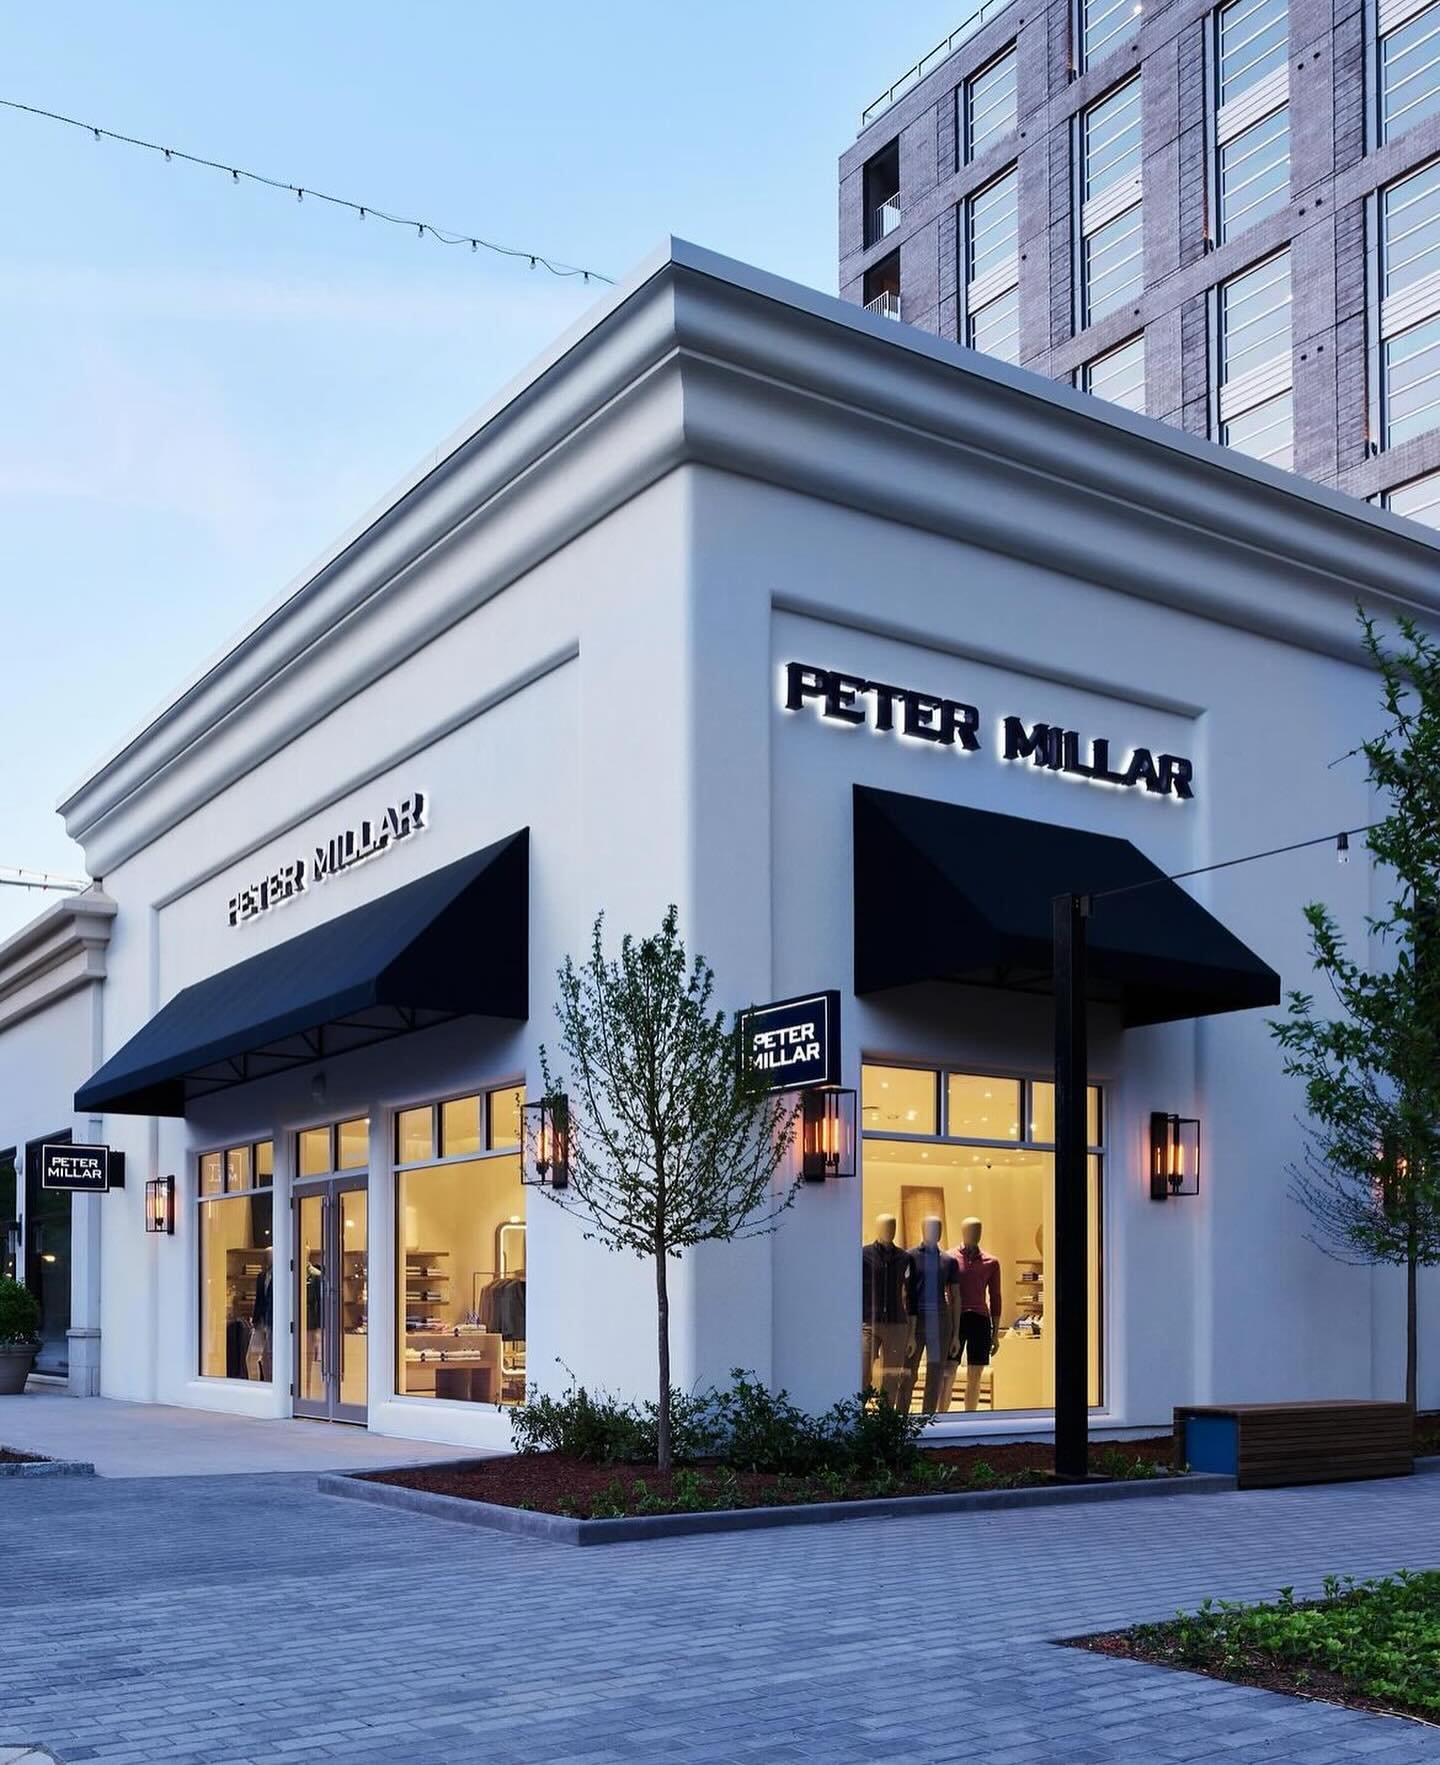 NOW OPEN! 🤩 @petermillar is officially open in their beautiful brand new store in #NorthHills!